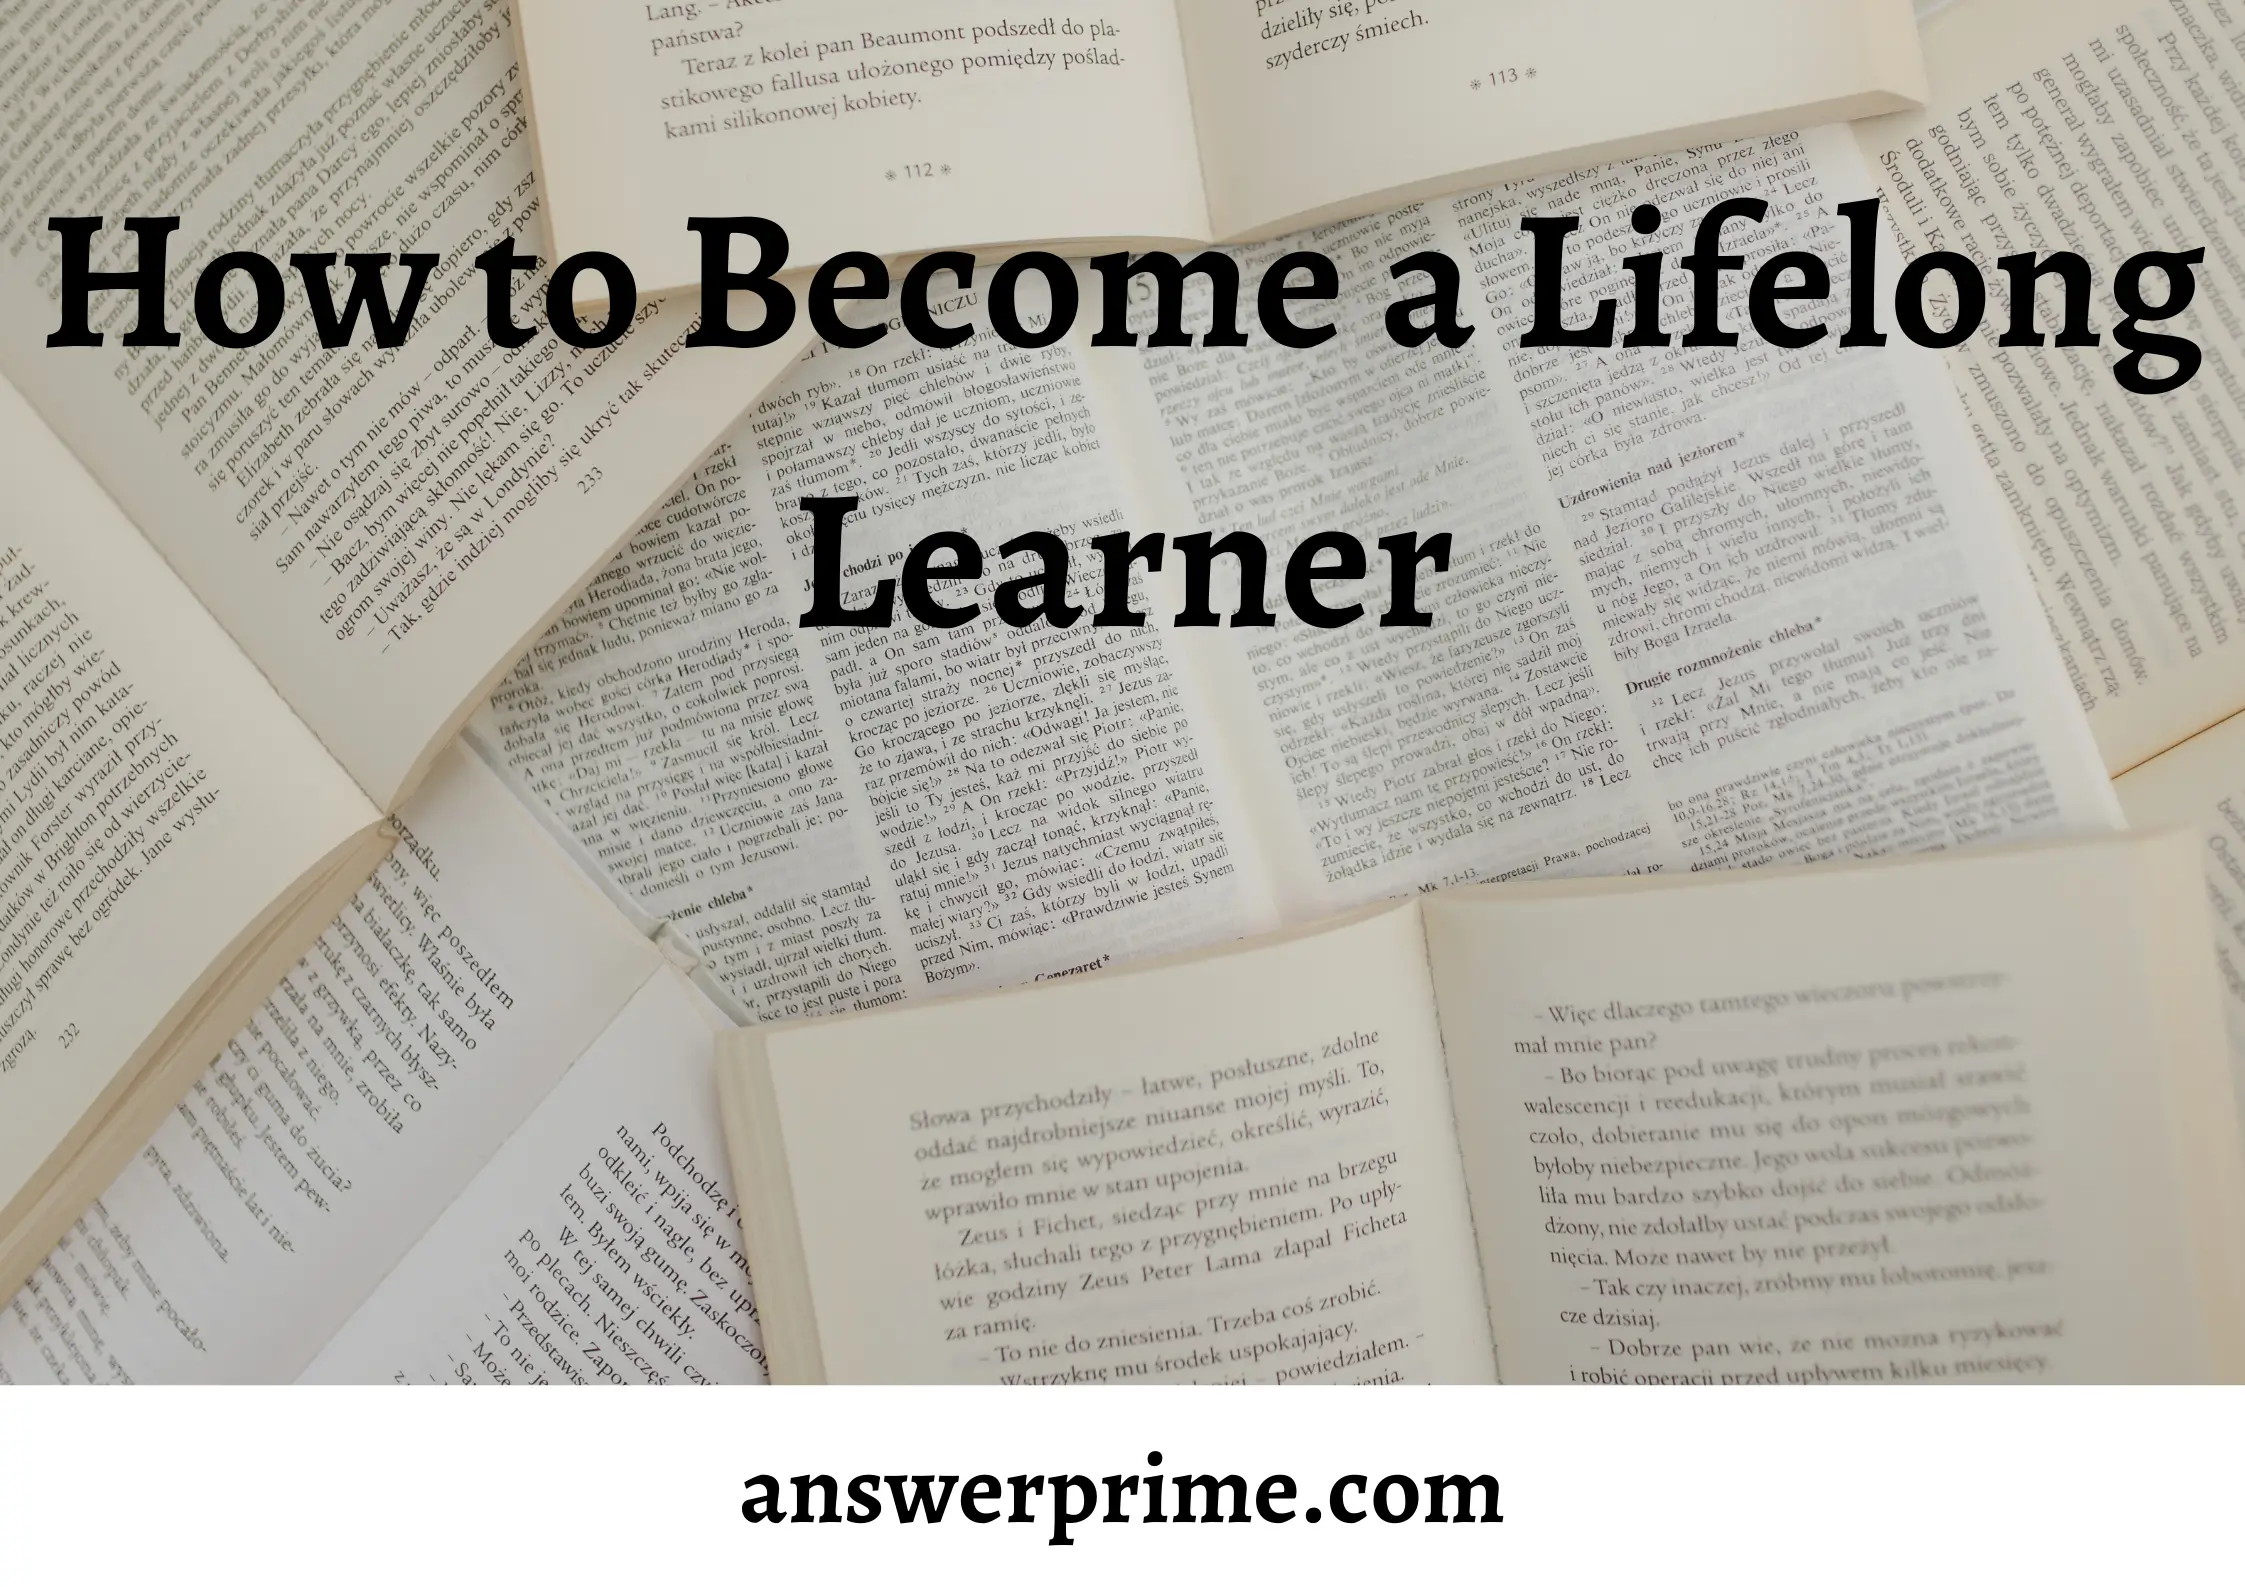 How to Become a Lifelong Learner